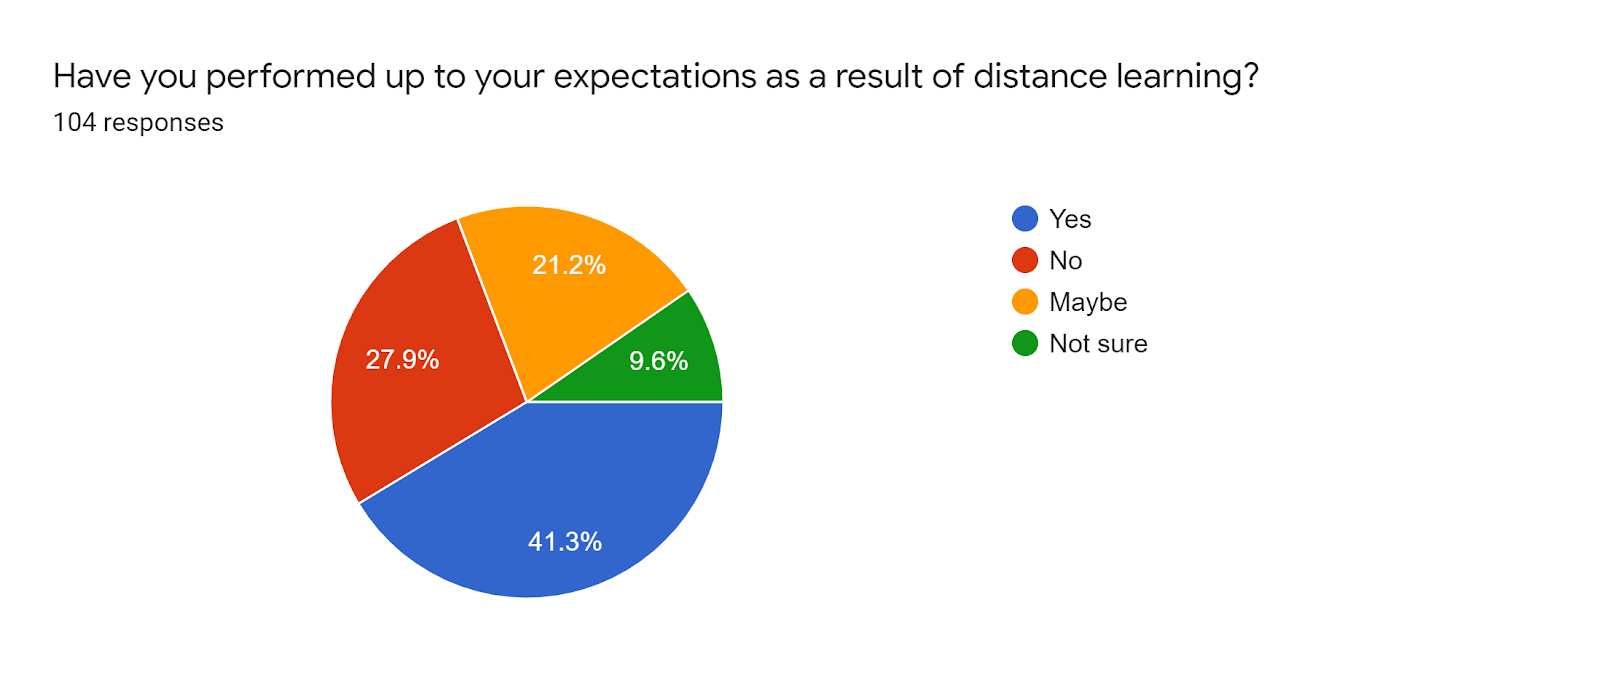 Forms response chart. Question title: Have you performed up to your expectations as a result of distance learning?. Number of responses: 104 responses.